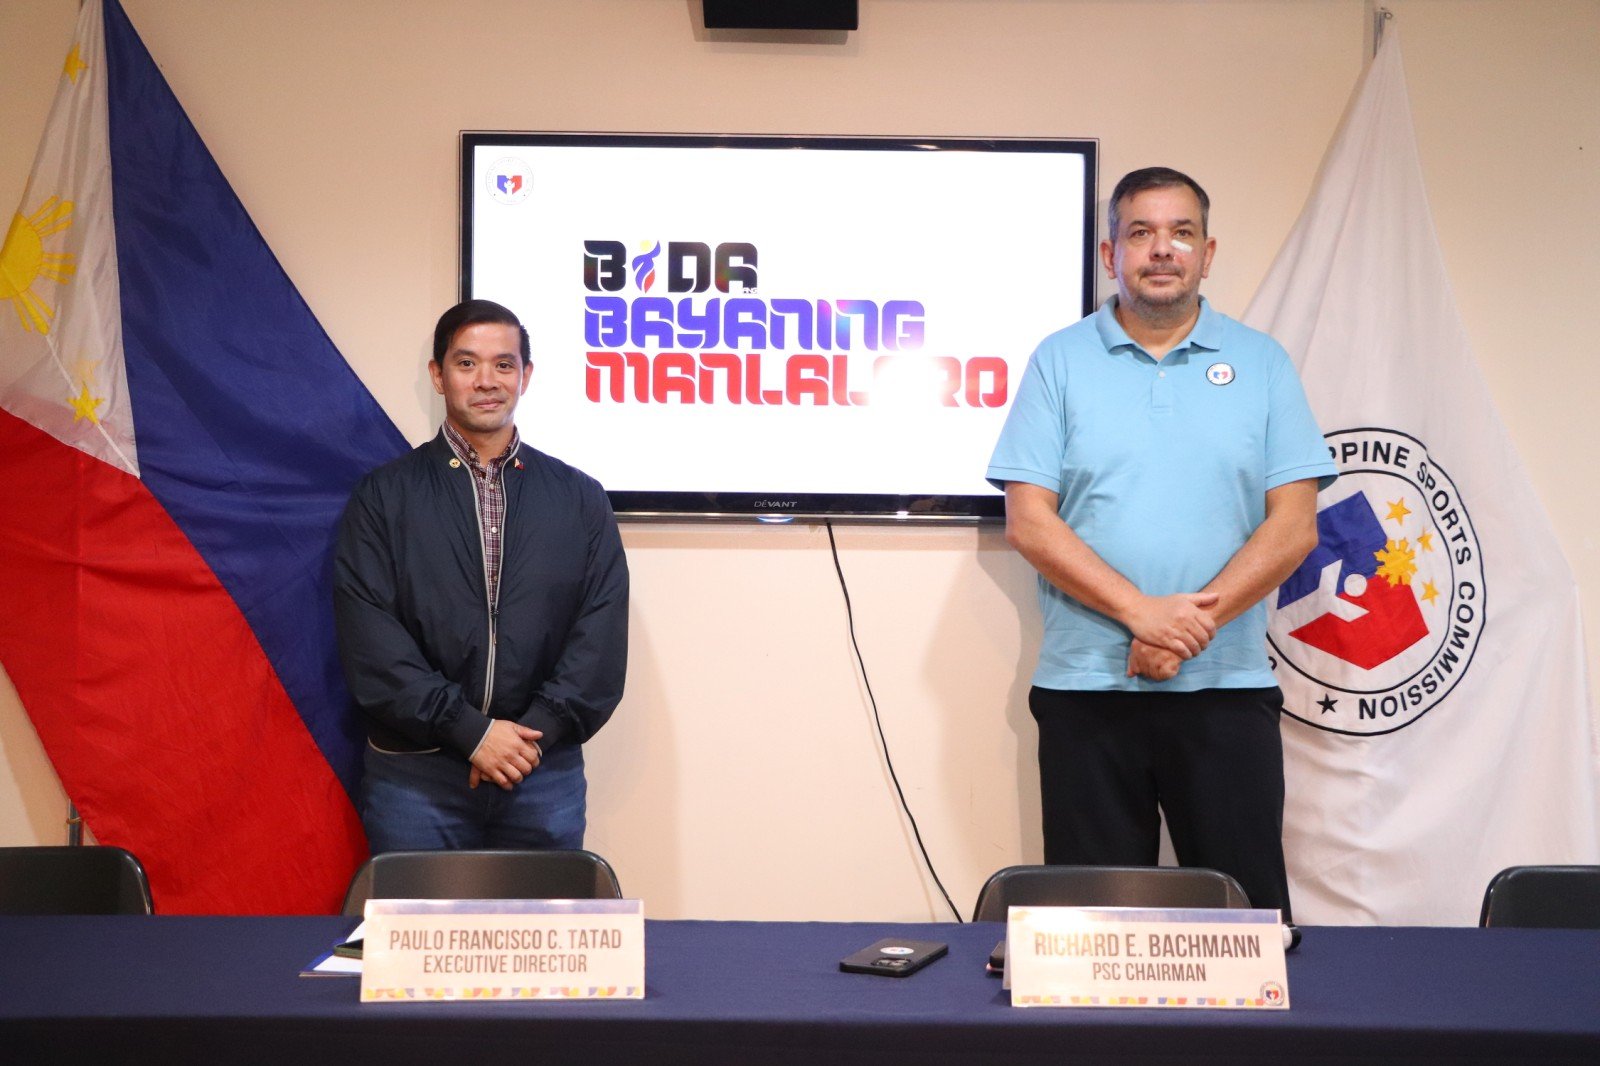 (L-R) Philippine Sports Commission (PSC) Executive Director Paulo Francisco Tatad and Chairman Richard Bachmann during the press conference at the PSC Admin Bldg., Rizal Memorial Sports Complex in Manila on Friday.